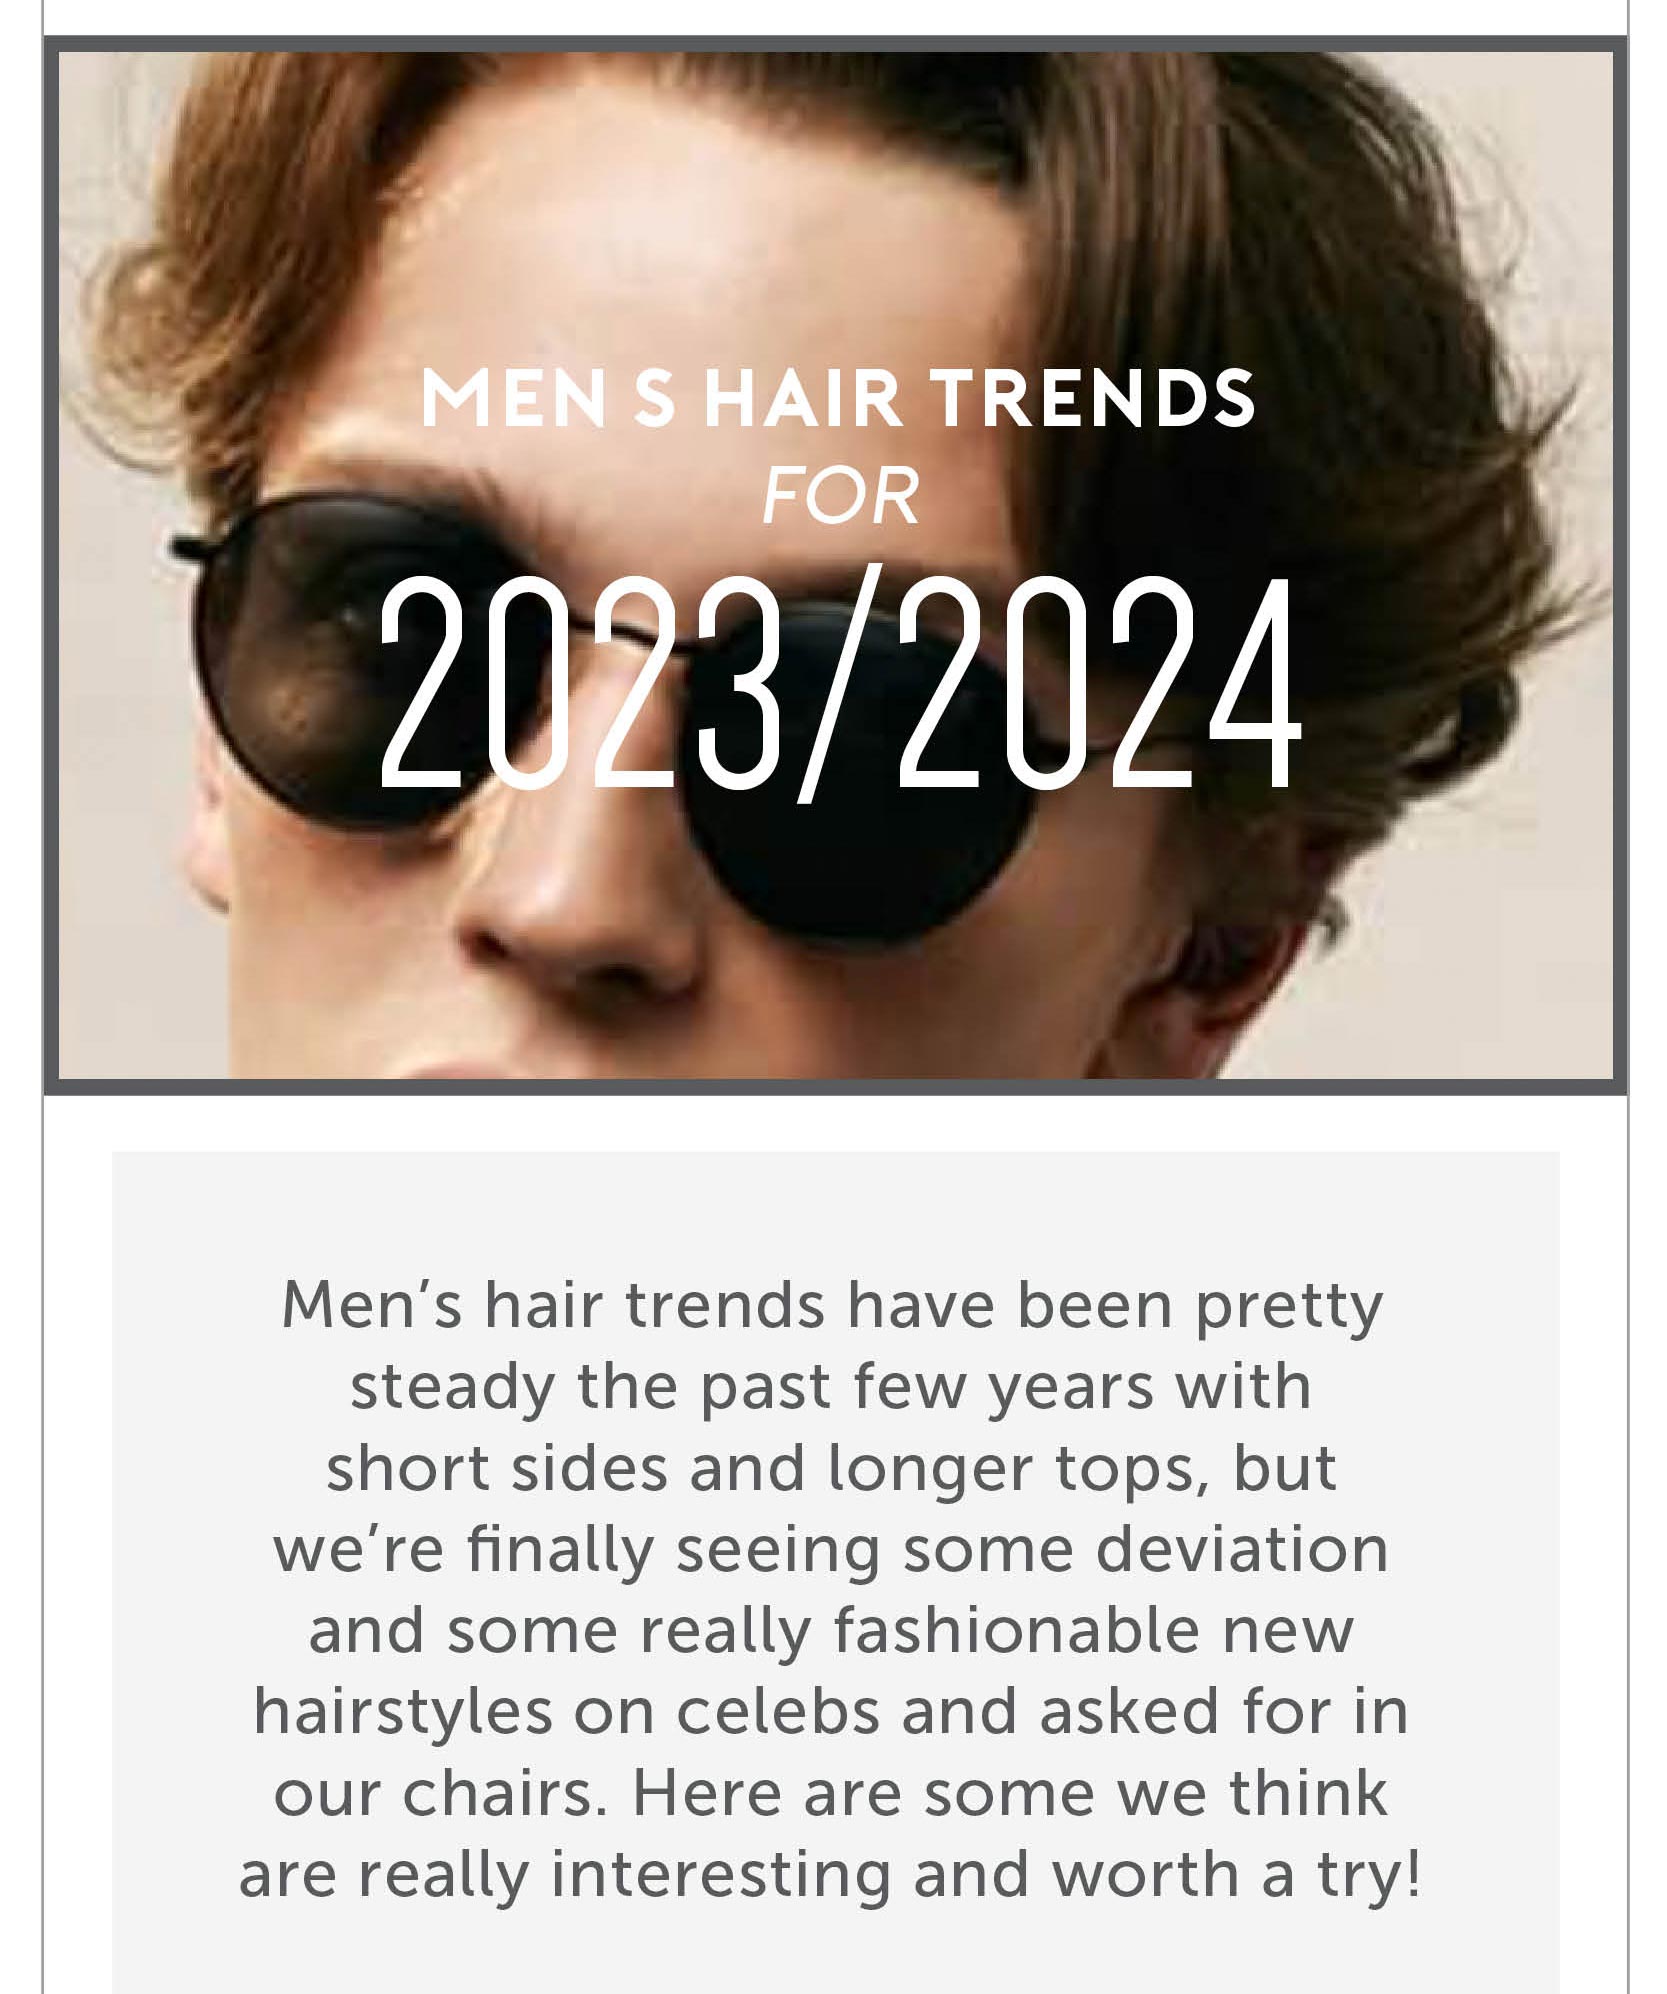 Men’s hair trends for 2023/2024 Men’s hair trends have been pretty steady the past few years with short sides and longer tops, but we’re finally seeing some deviation and some really fashionable new hairstyles on celebs and asked for in our chairs. Here are some we think are really interesting and worth a try! 